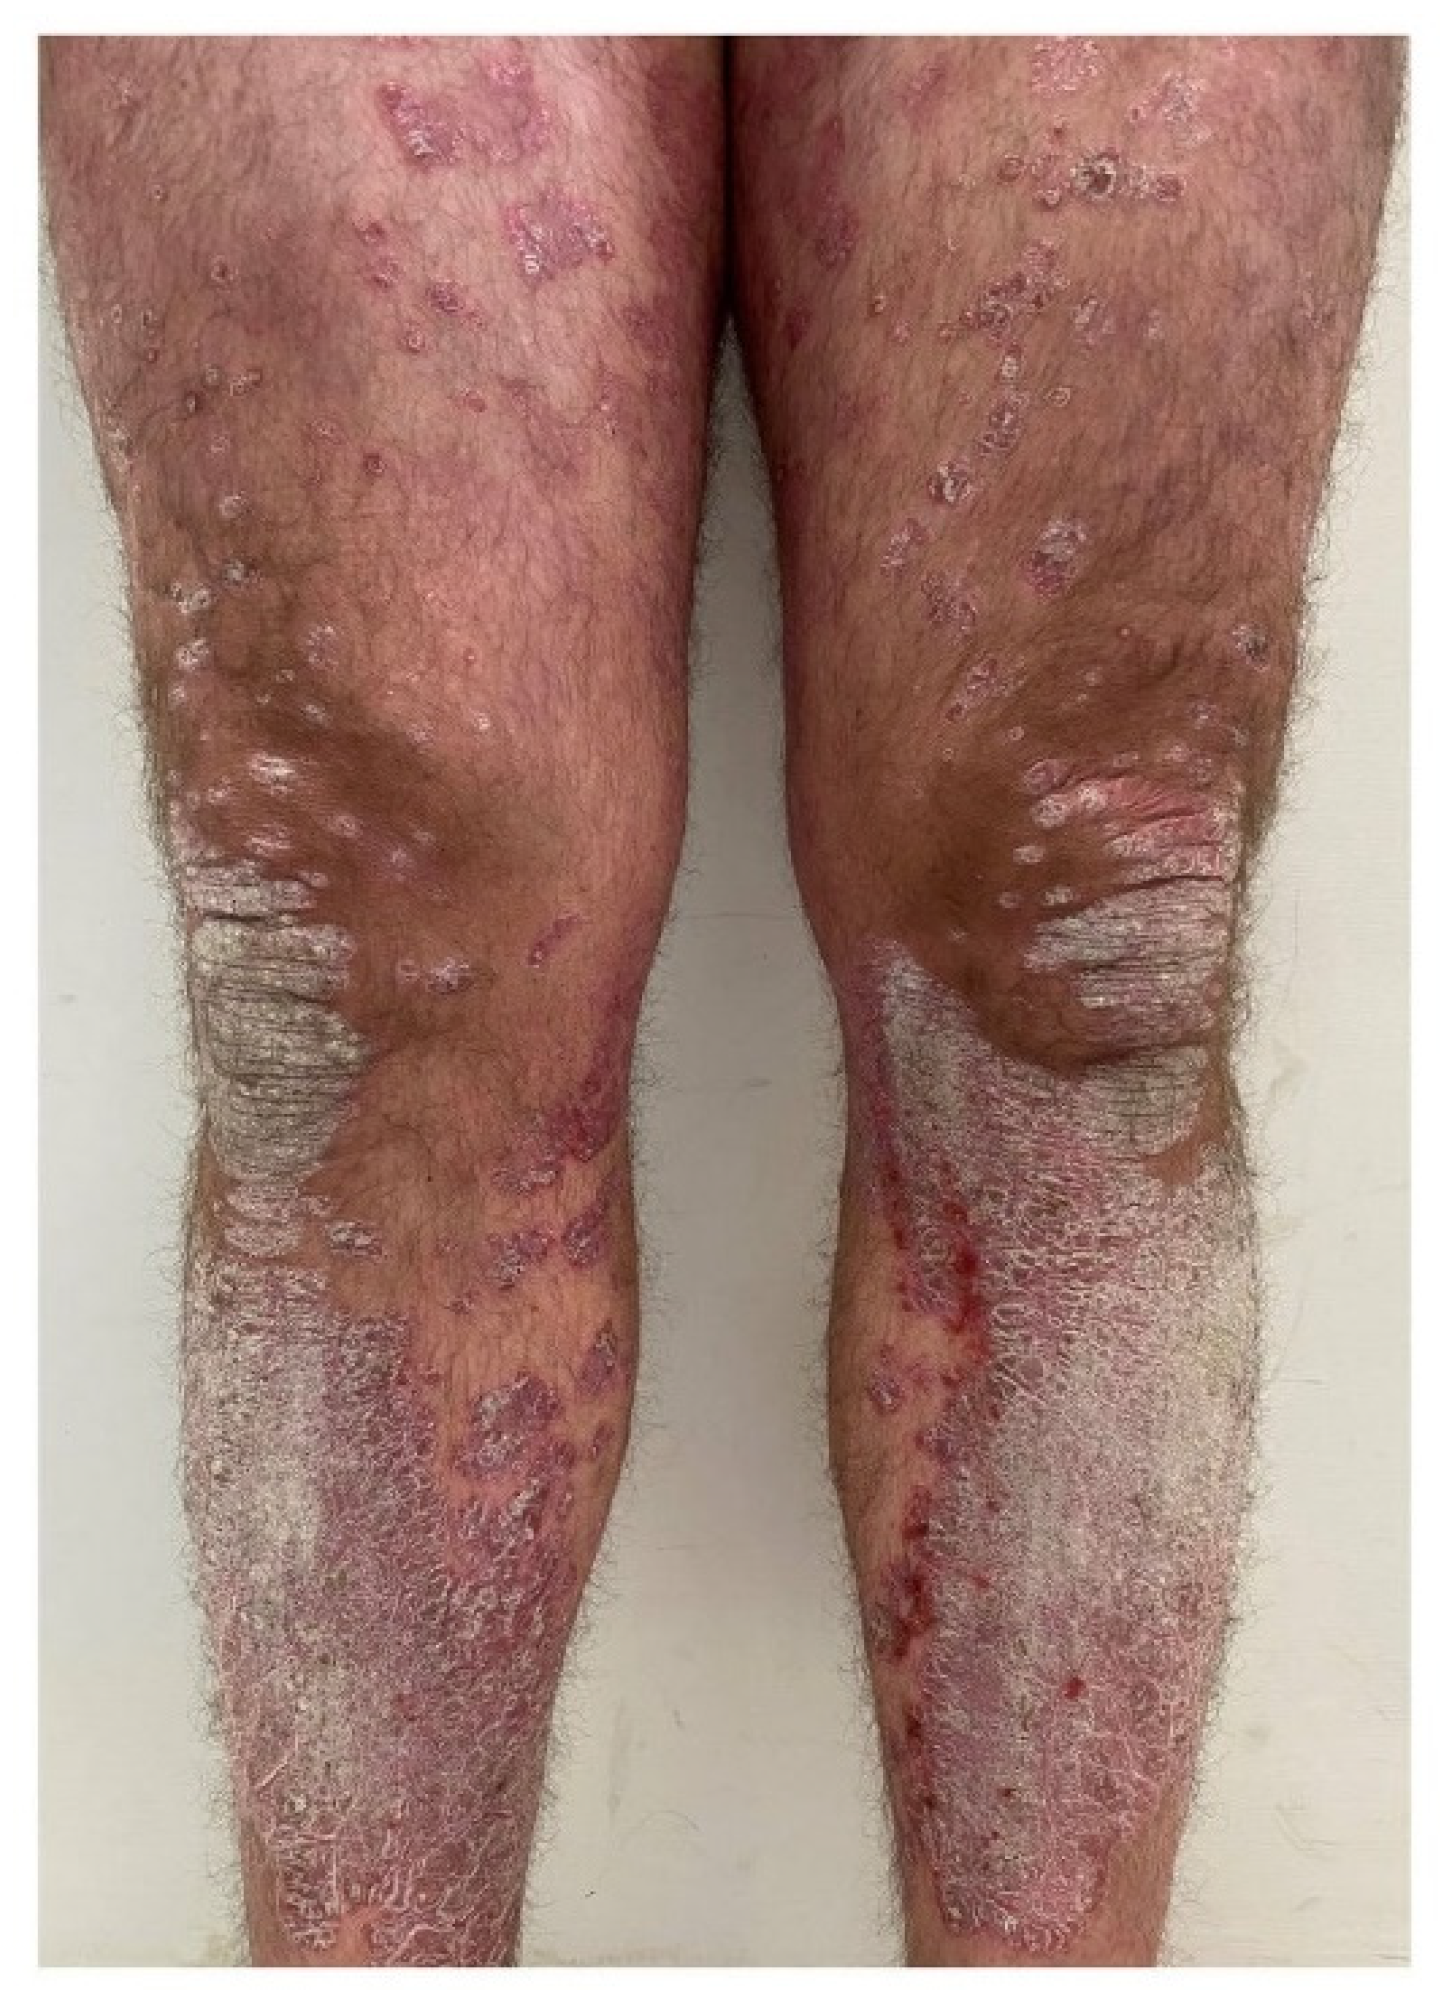 IJMS | Free Full-Text | Could Targeted Pharmacotherapies Exert a &ldquo; Disease Modification Effect&rdquo; in Patients with Chronic Plaque Psoriasis ?